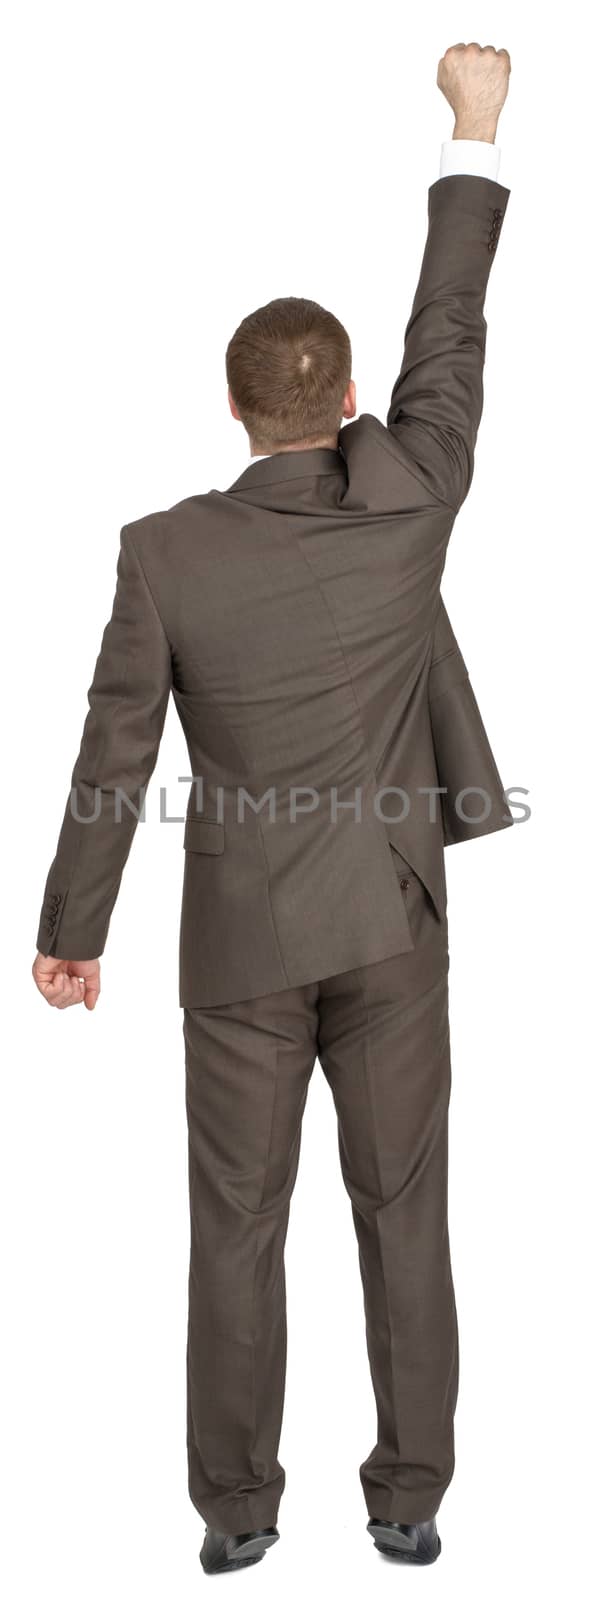 Businessman with right arm up and looking up isolated on white background, rear view